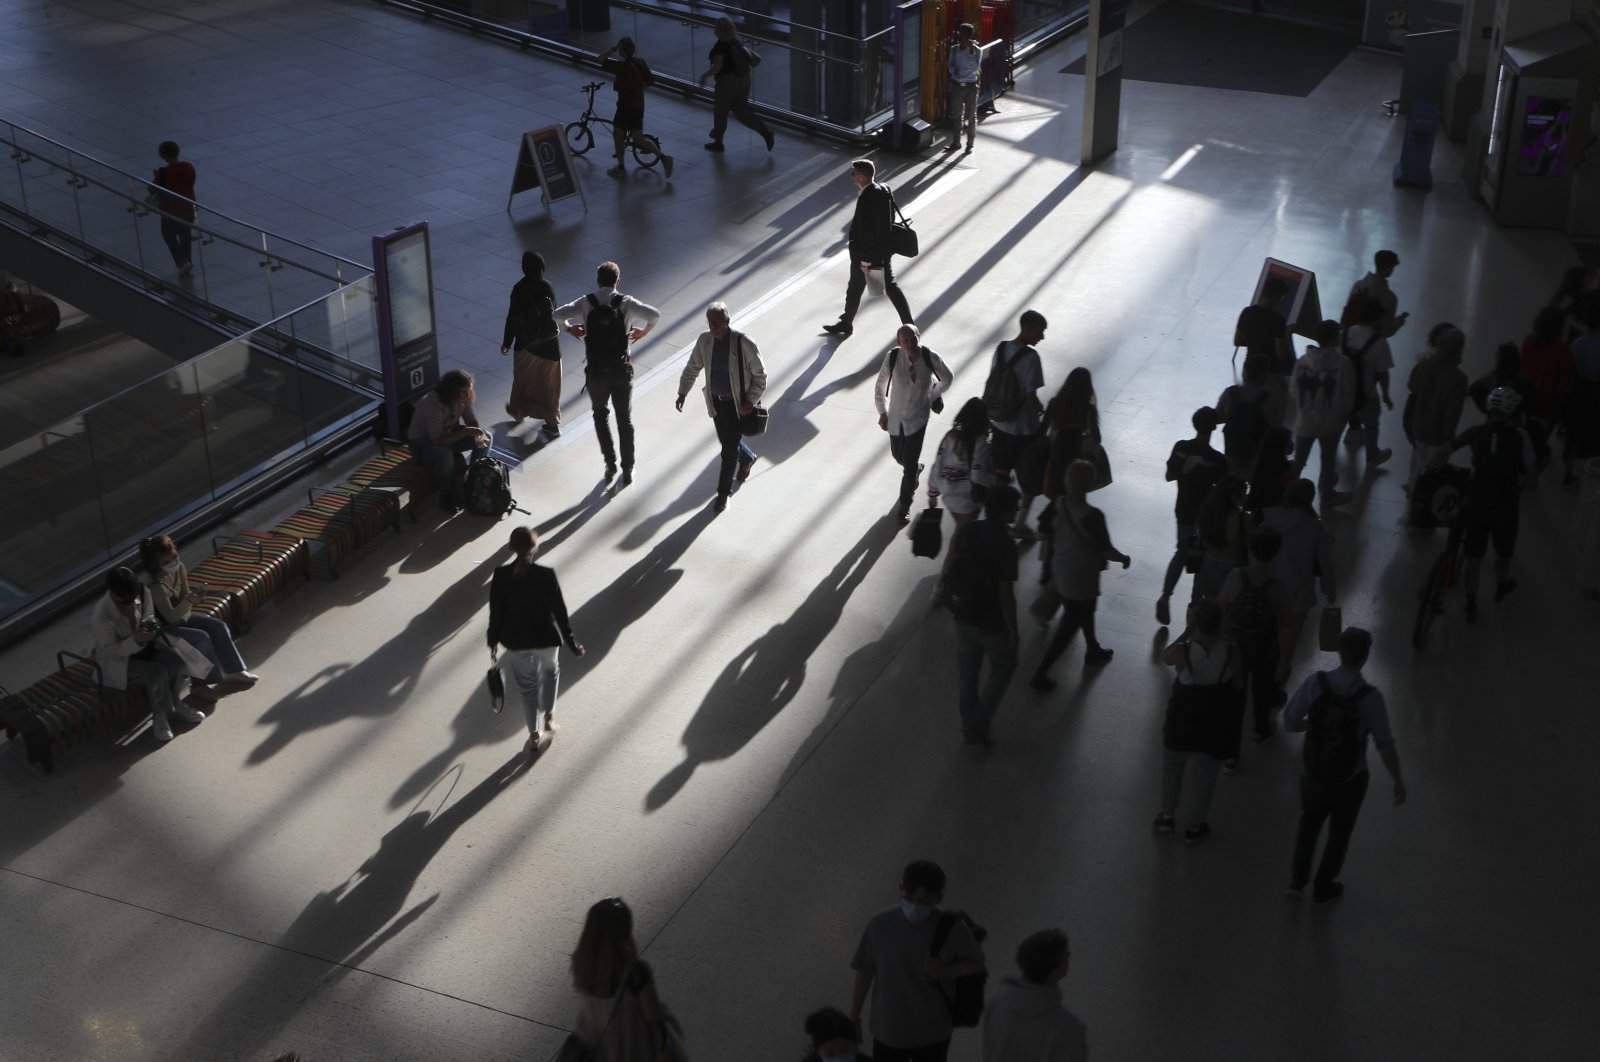 Commuters are silhouetted in the evening light as they walk inside Waterloo station in London, U.K., June 20, 2022. (AP Photo)